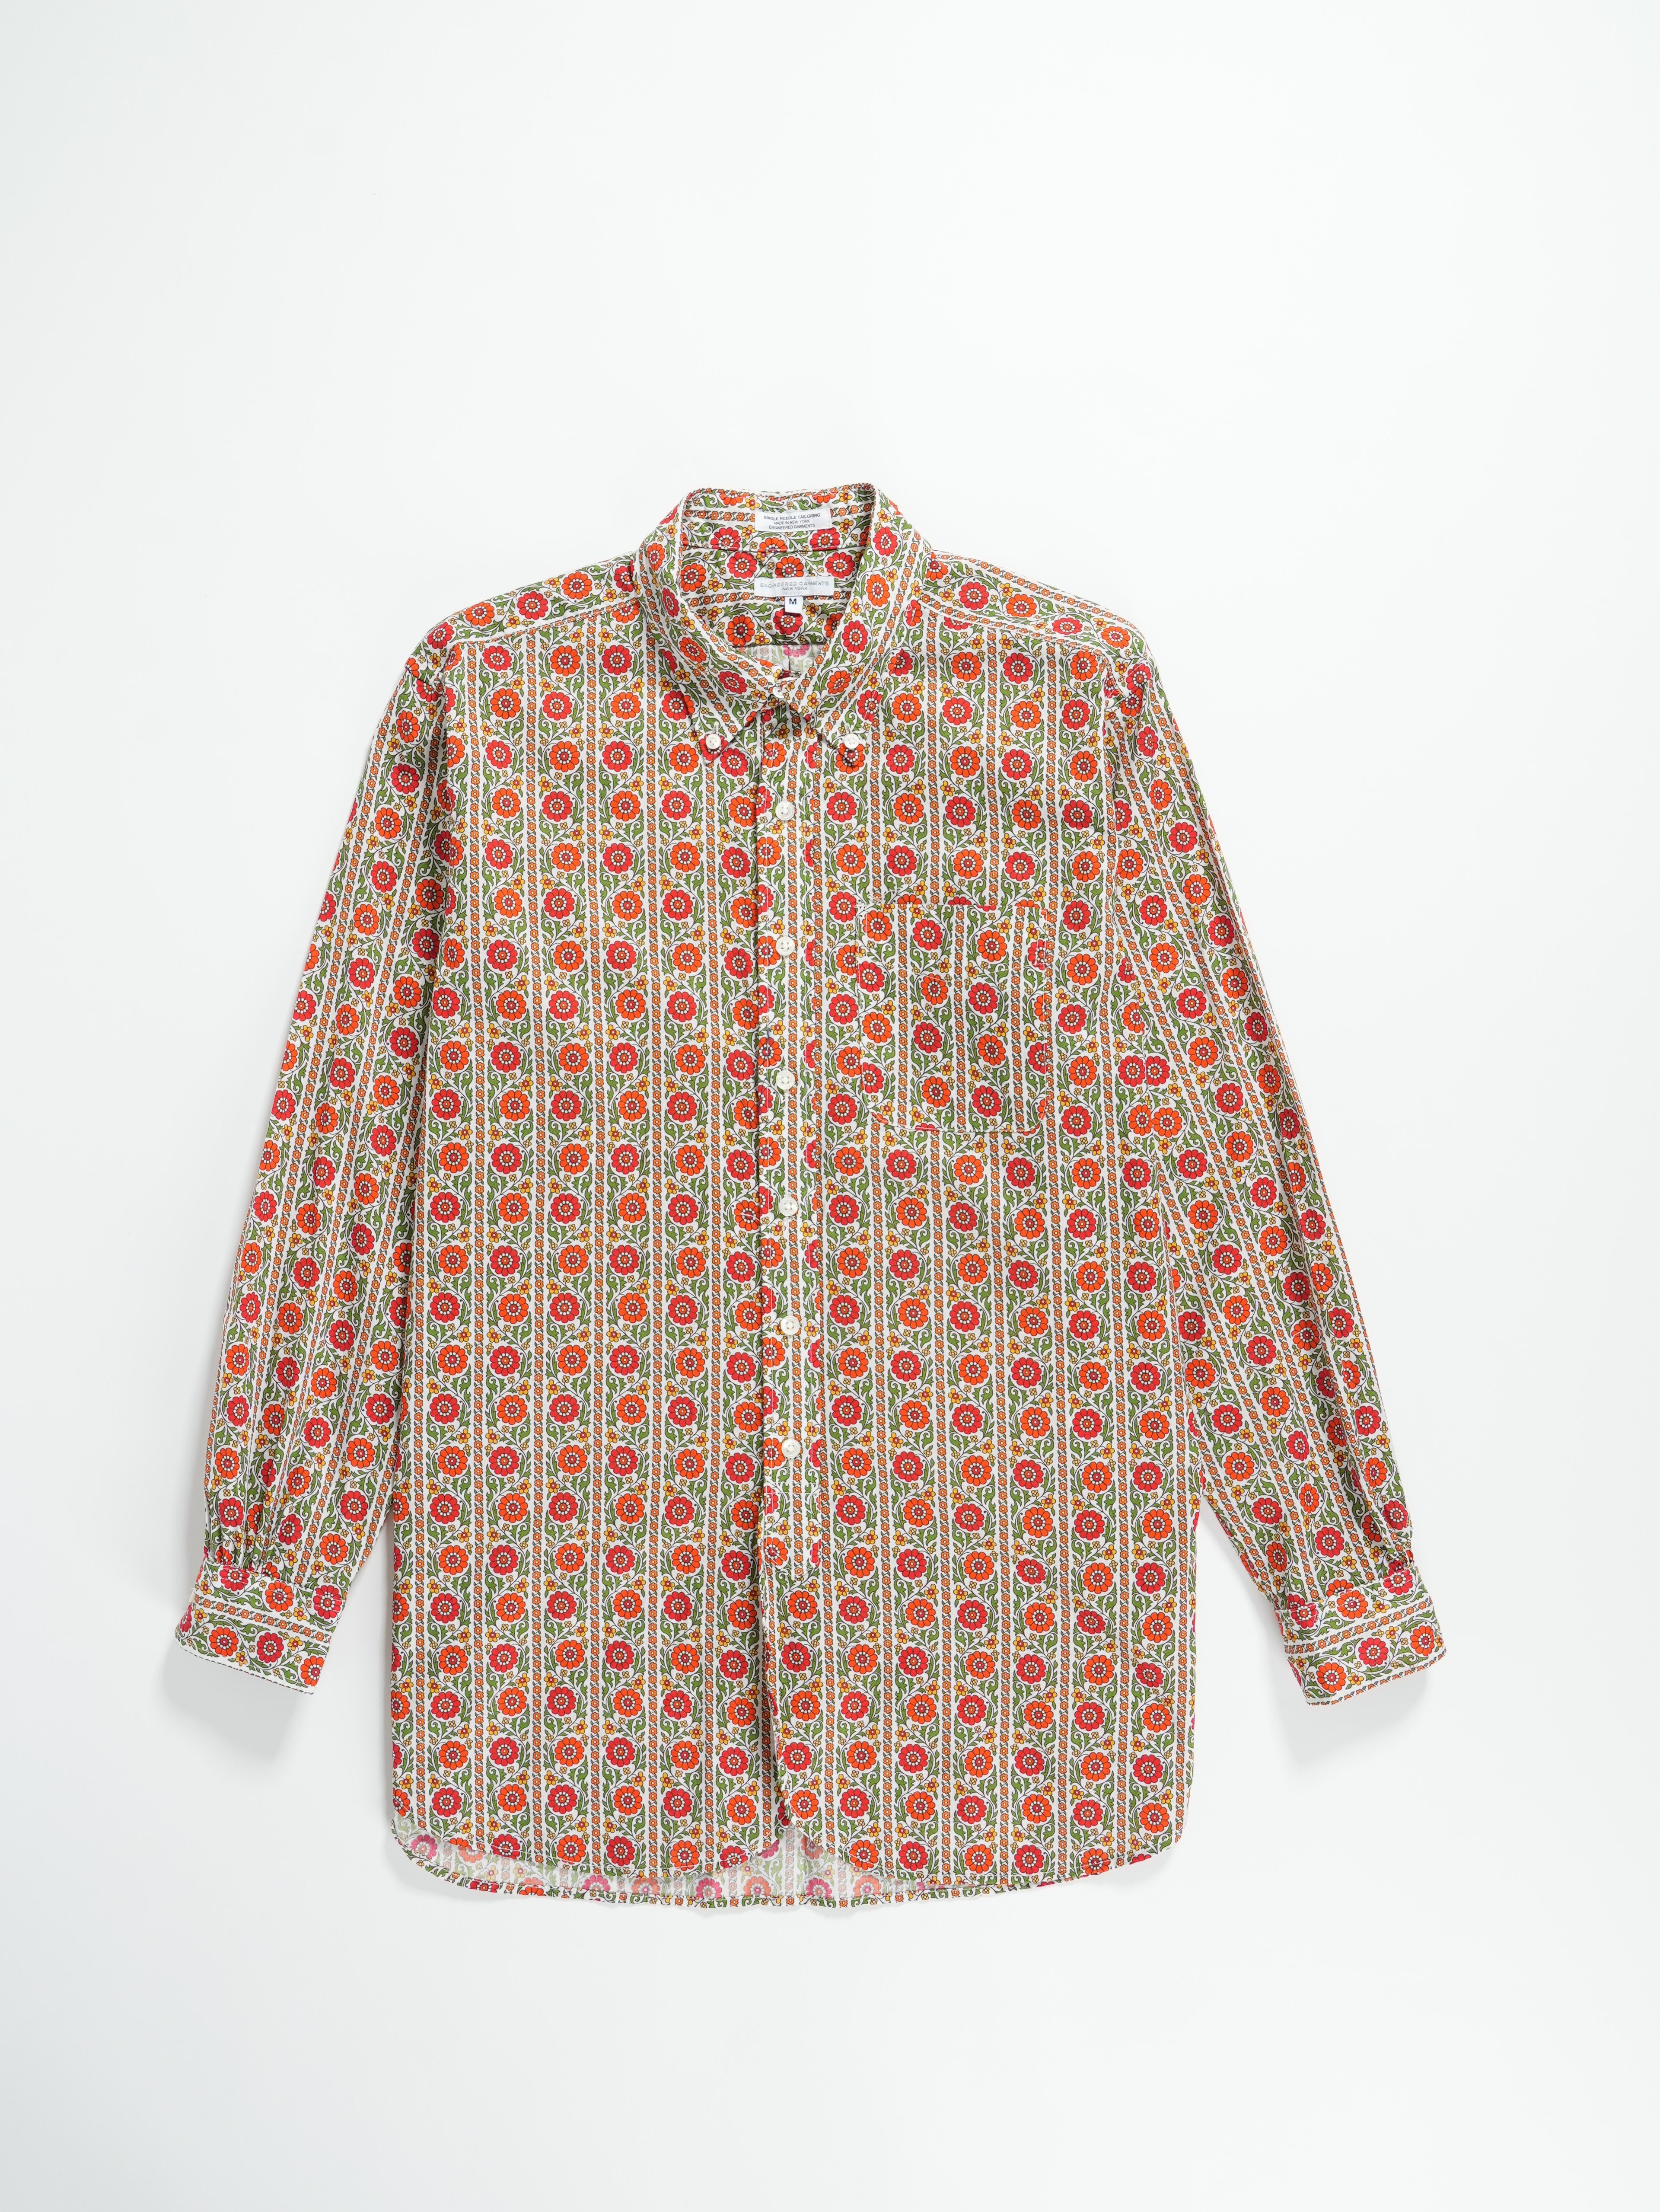 New Nepenthes | Shirts York